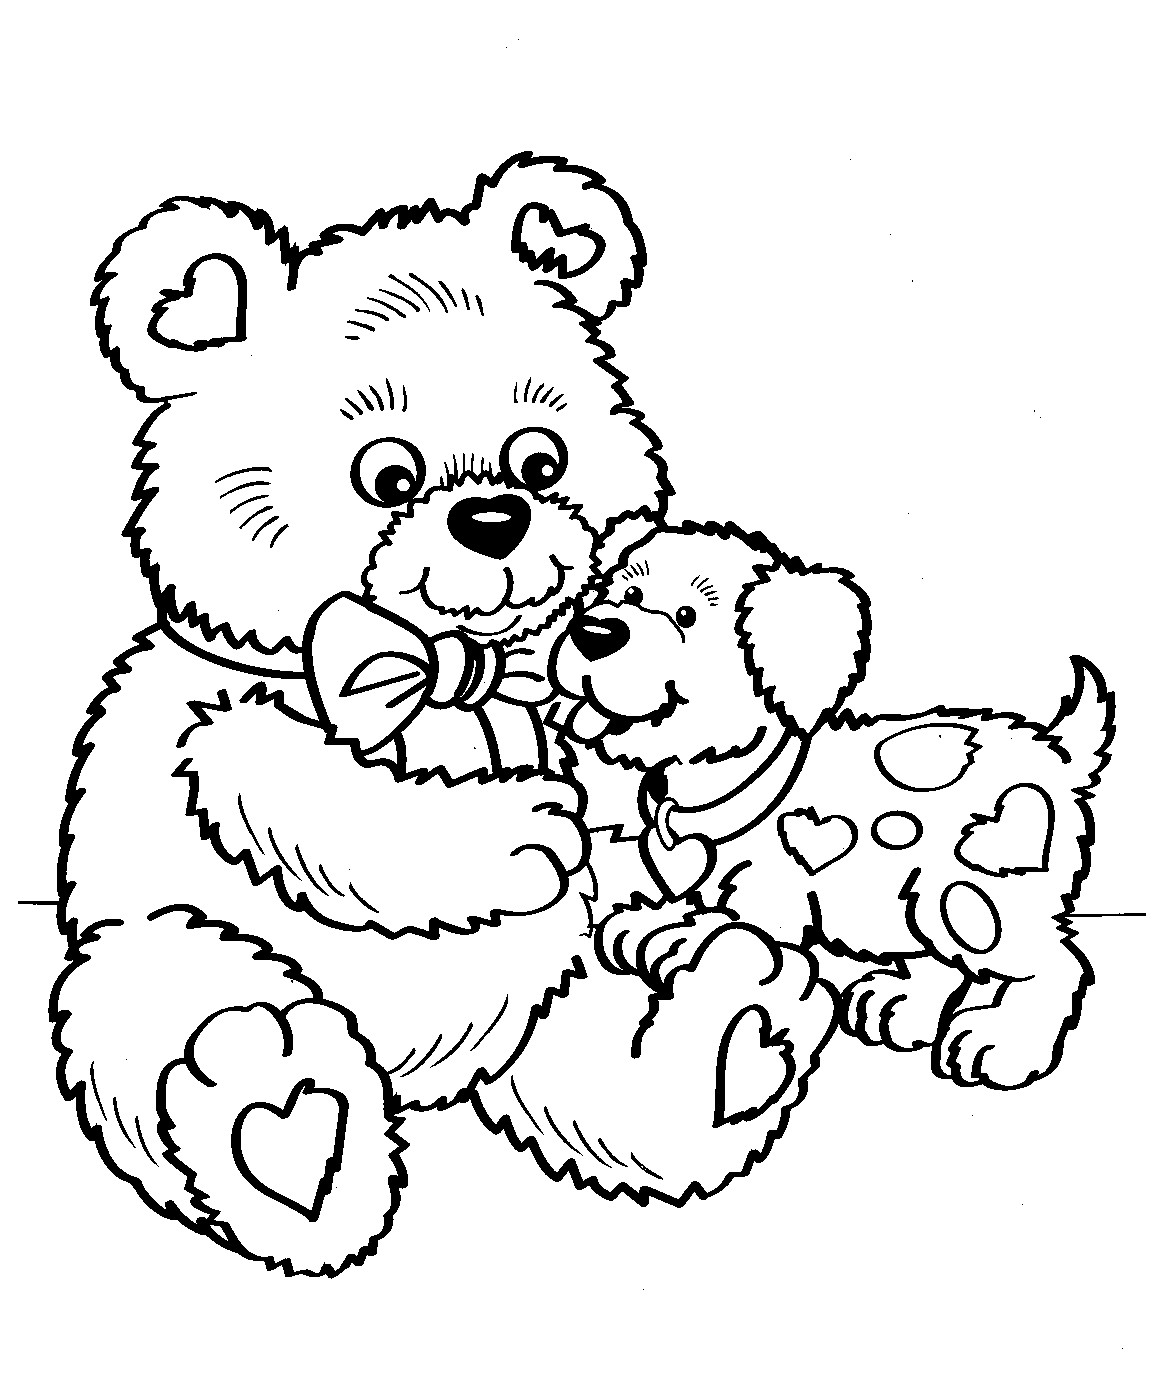 Free Printable Valentines Day Coloring Pages
 Coloring Pages Hearts Free Printable Coloring Pages for